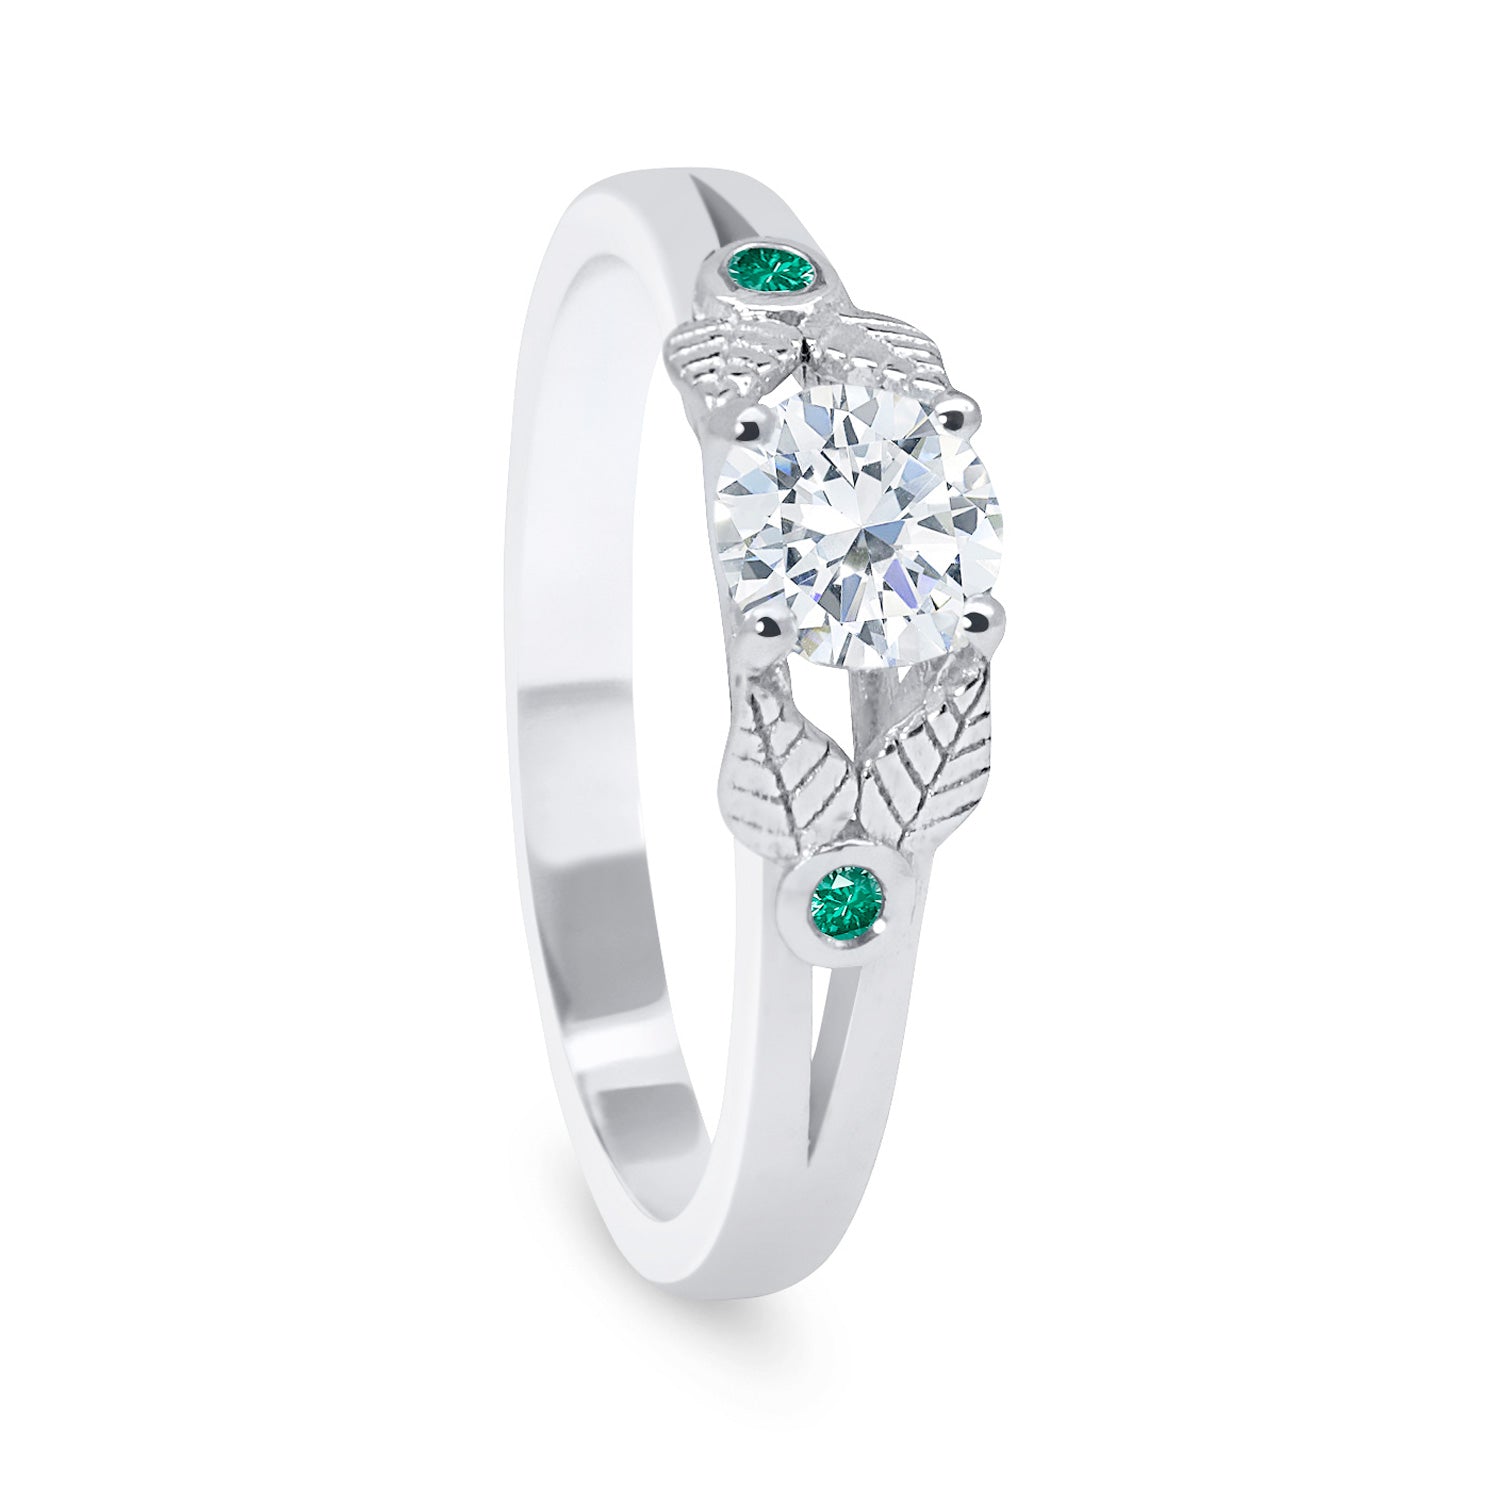 Bespoke Rob engagement ring - white Fairmined Ecological Gold, Canadamark diamond, fair-traded emeralds and nature-inspired engravings